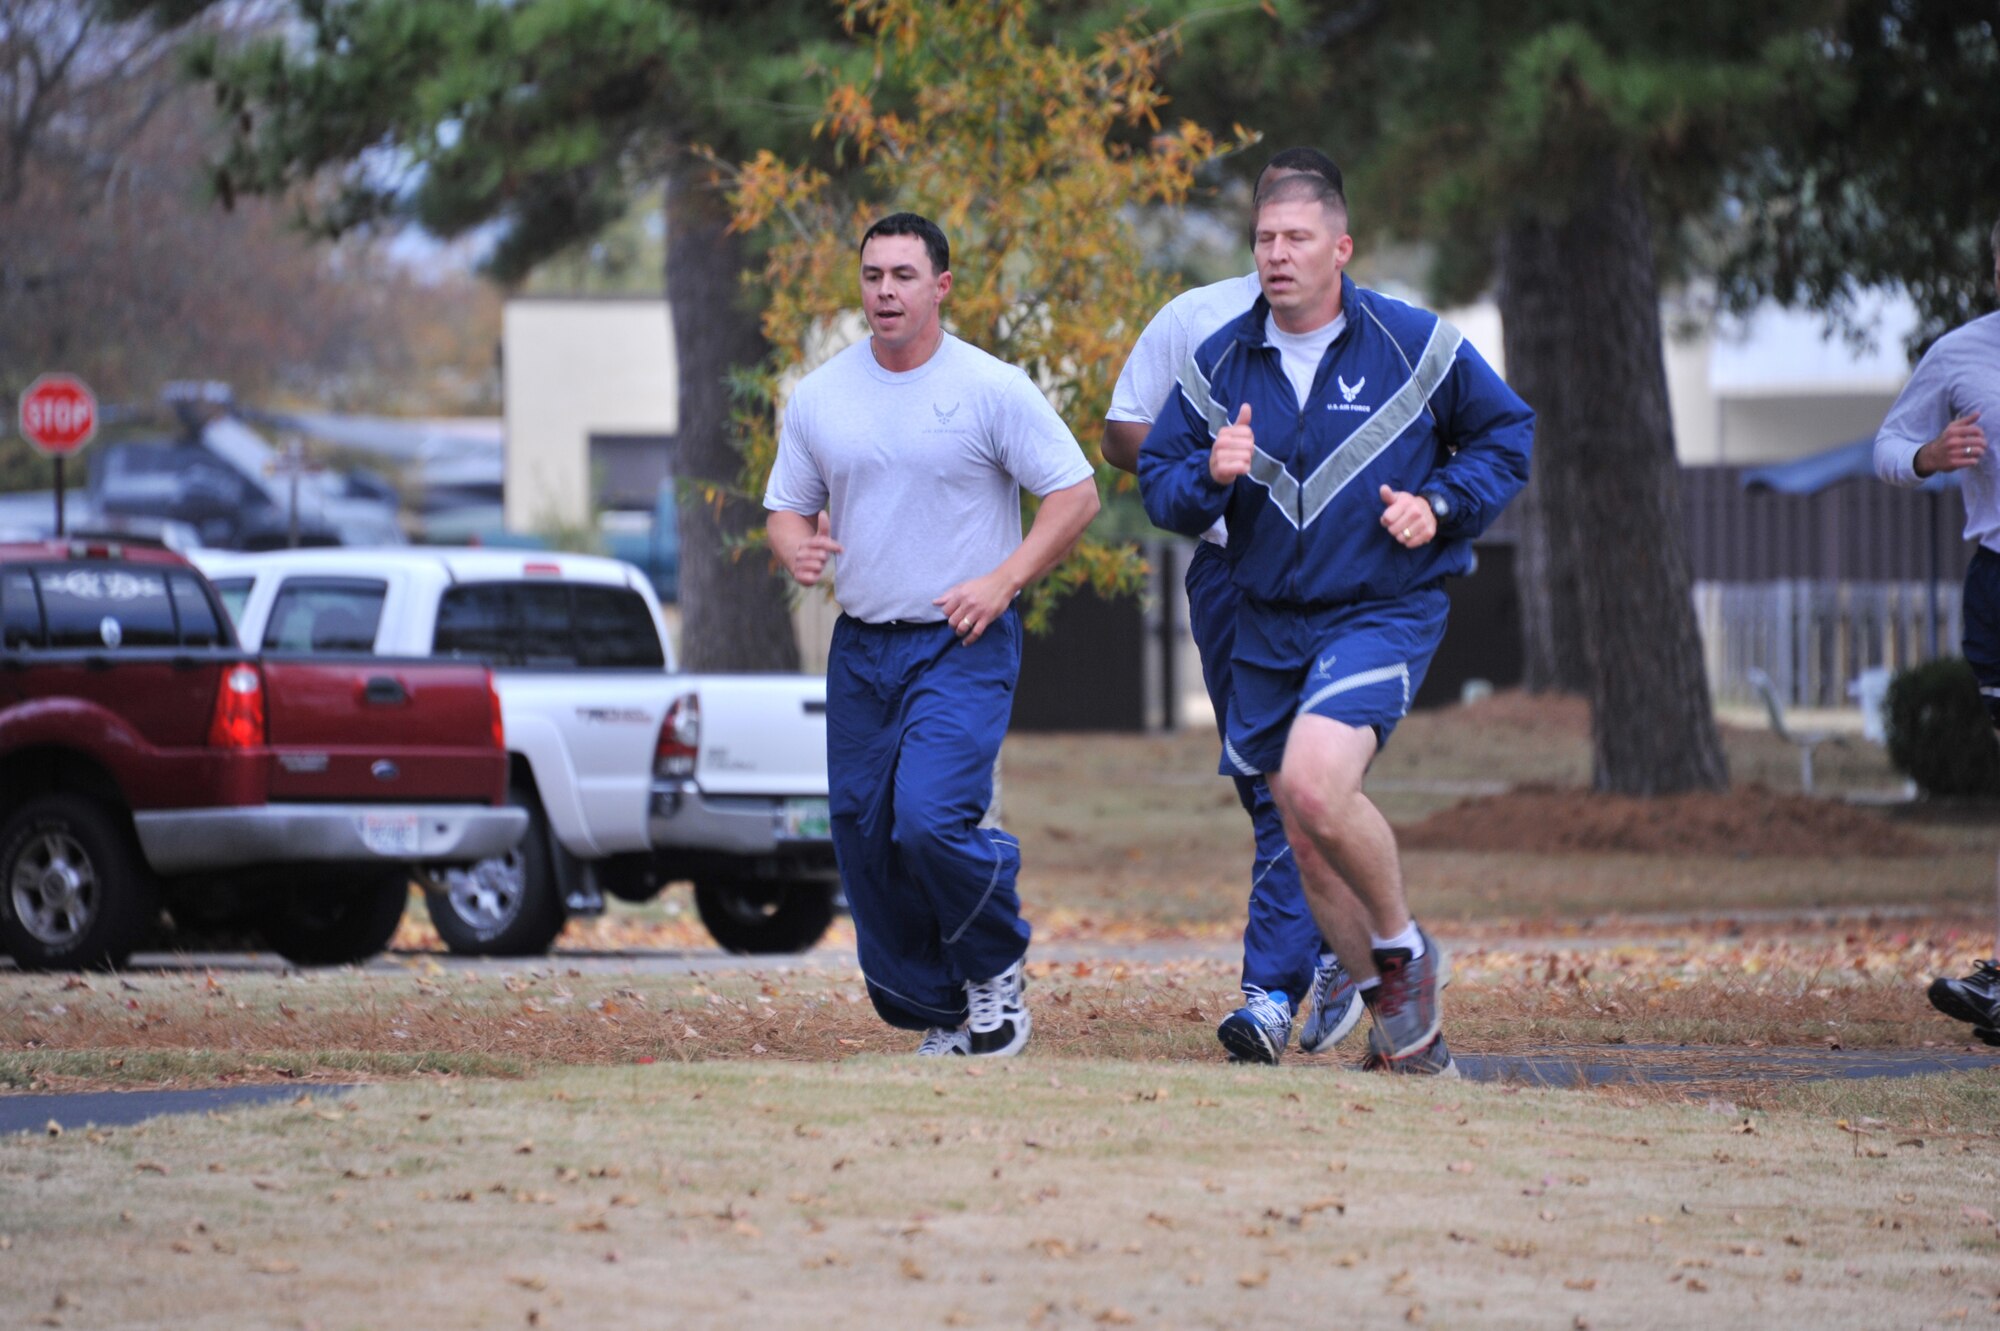 Tech. Sgt. Steven Pierce Jr. and Master Sgt. Shane Merillar, both from Air Force Legal Operation Agency and attending the Senior NCO Professional Development Seminar, run during a physical training session at Maxwell Air Force Base, Nov. 21. The annual course also serves as the lead up to the senior NCO induction ceremony. (U.S. Air Force photo by Airman 1st Class William Blankenship)
